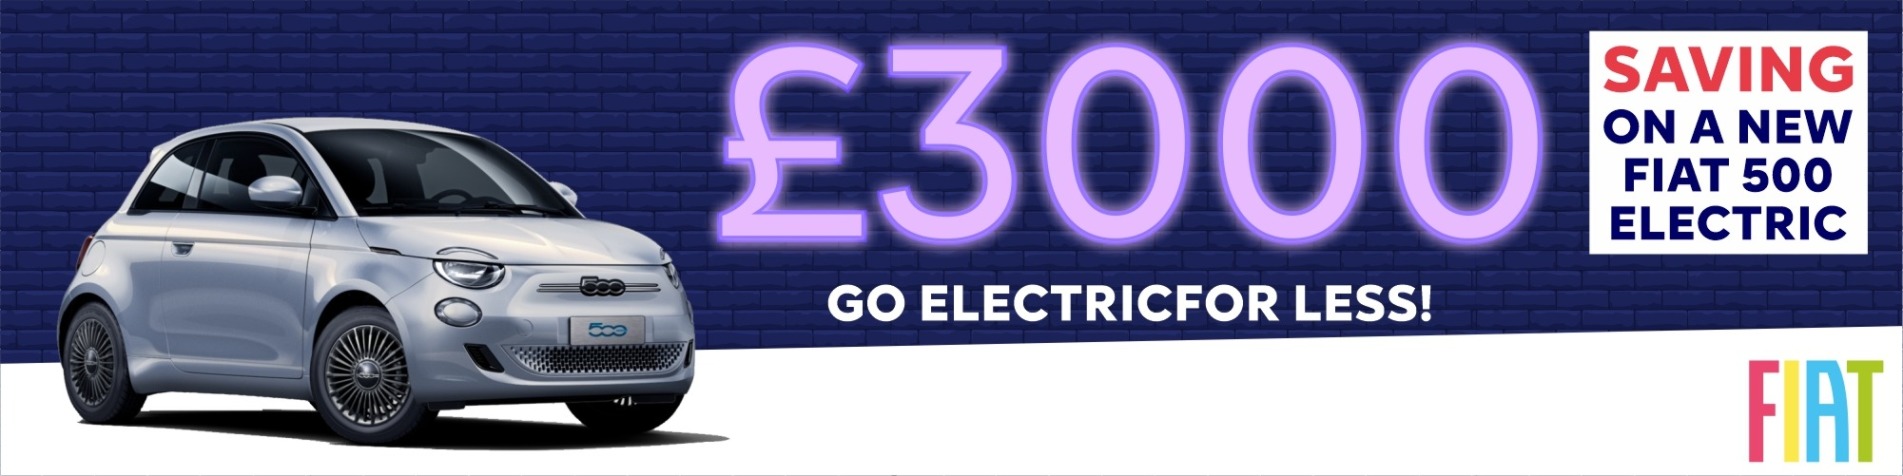 Save £3,000 on Electric Fiat